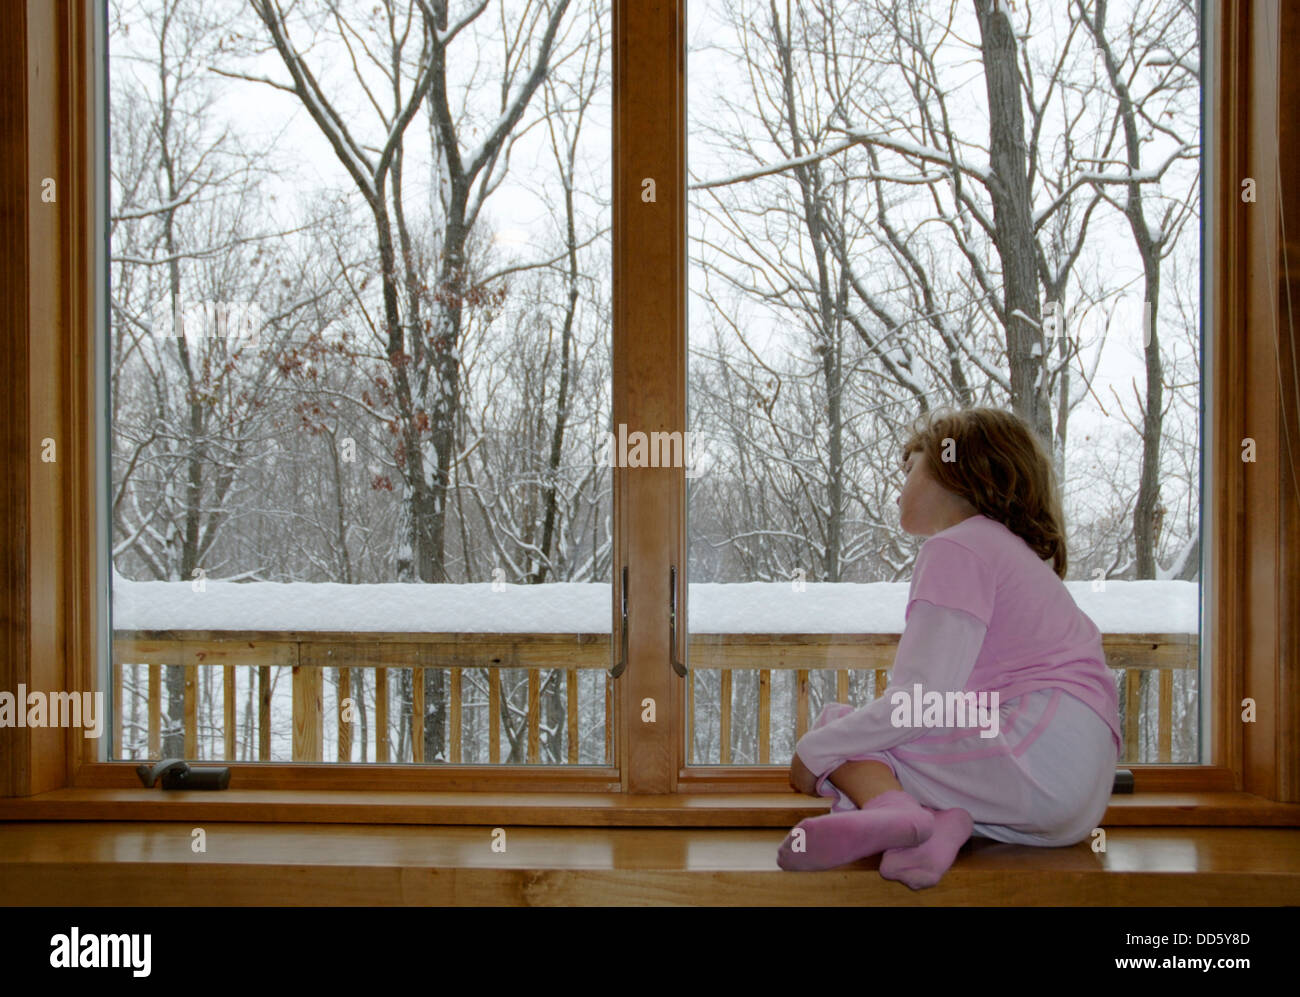 Sad girl winter day looking out window Stock Photo